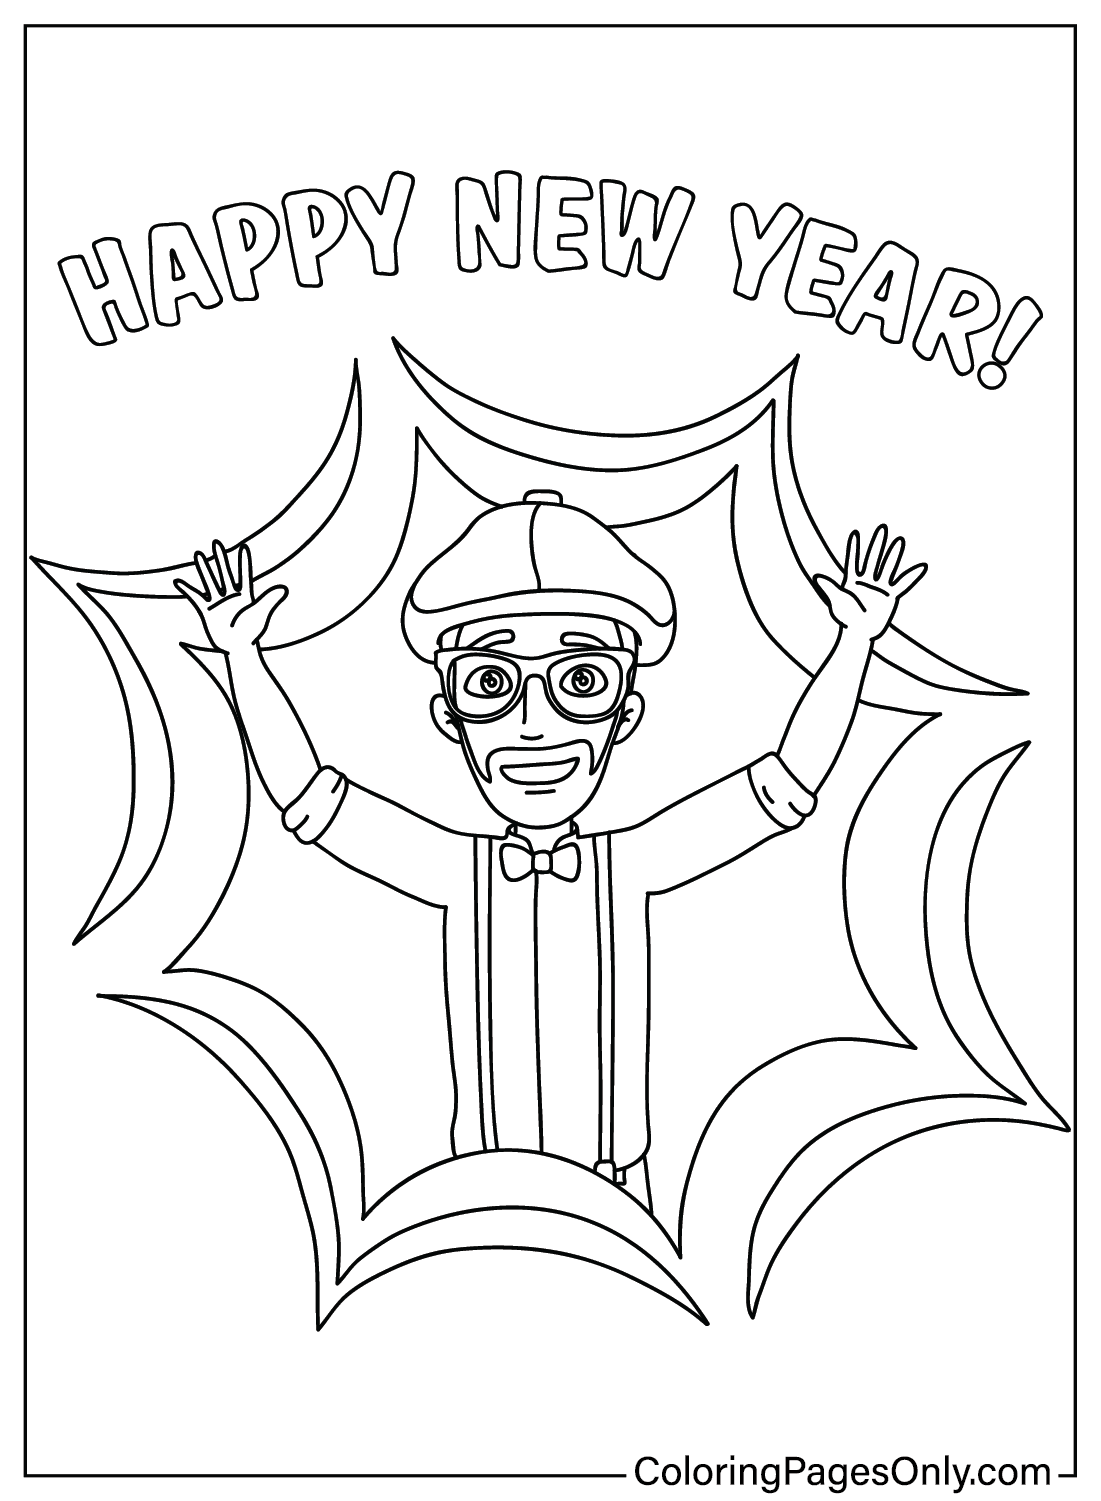 Blippi Coloring Pages to Download from Blippi